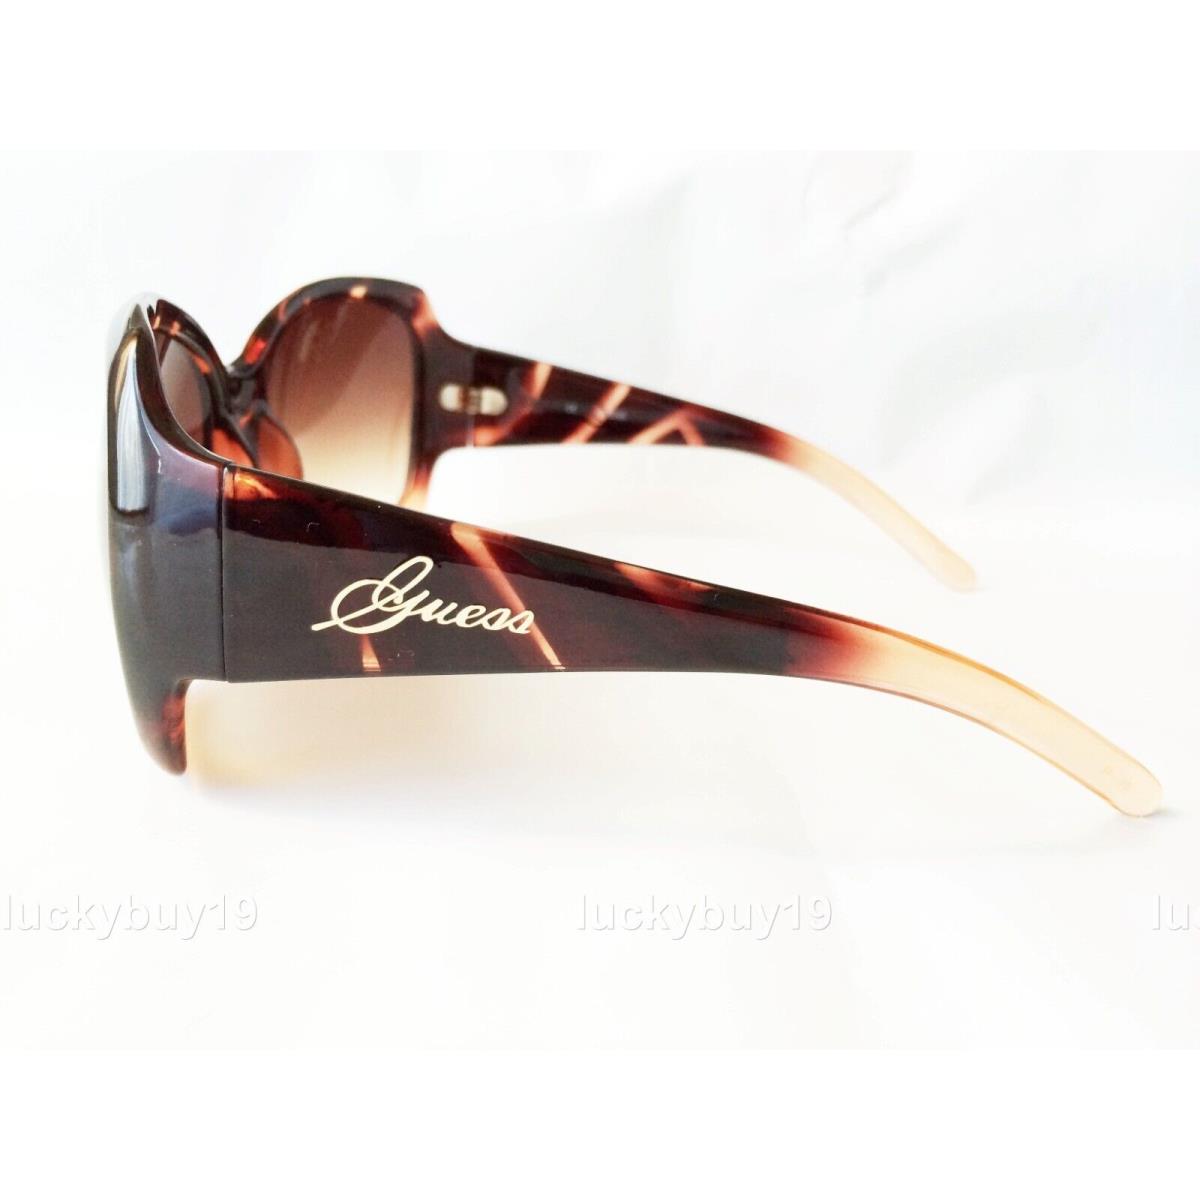 Guess sunglasses  - Brown Frame, Brown Lens 2